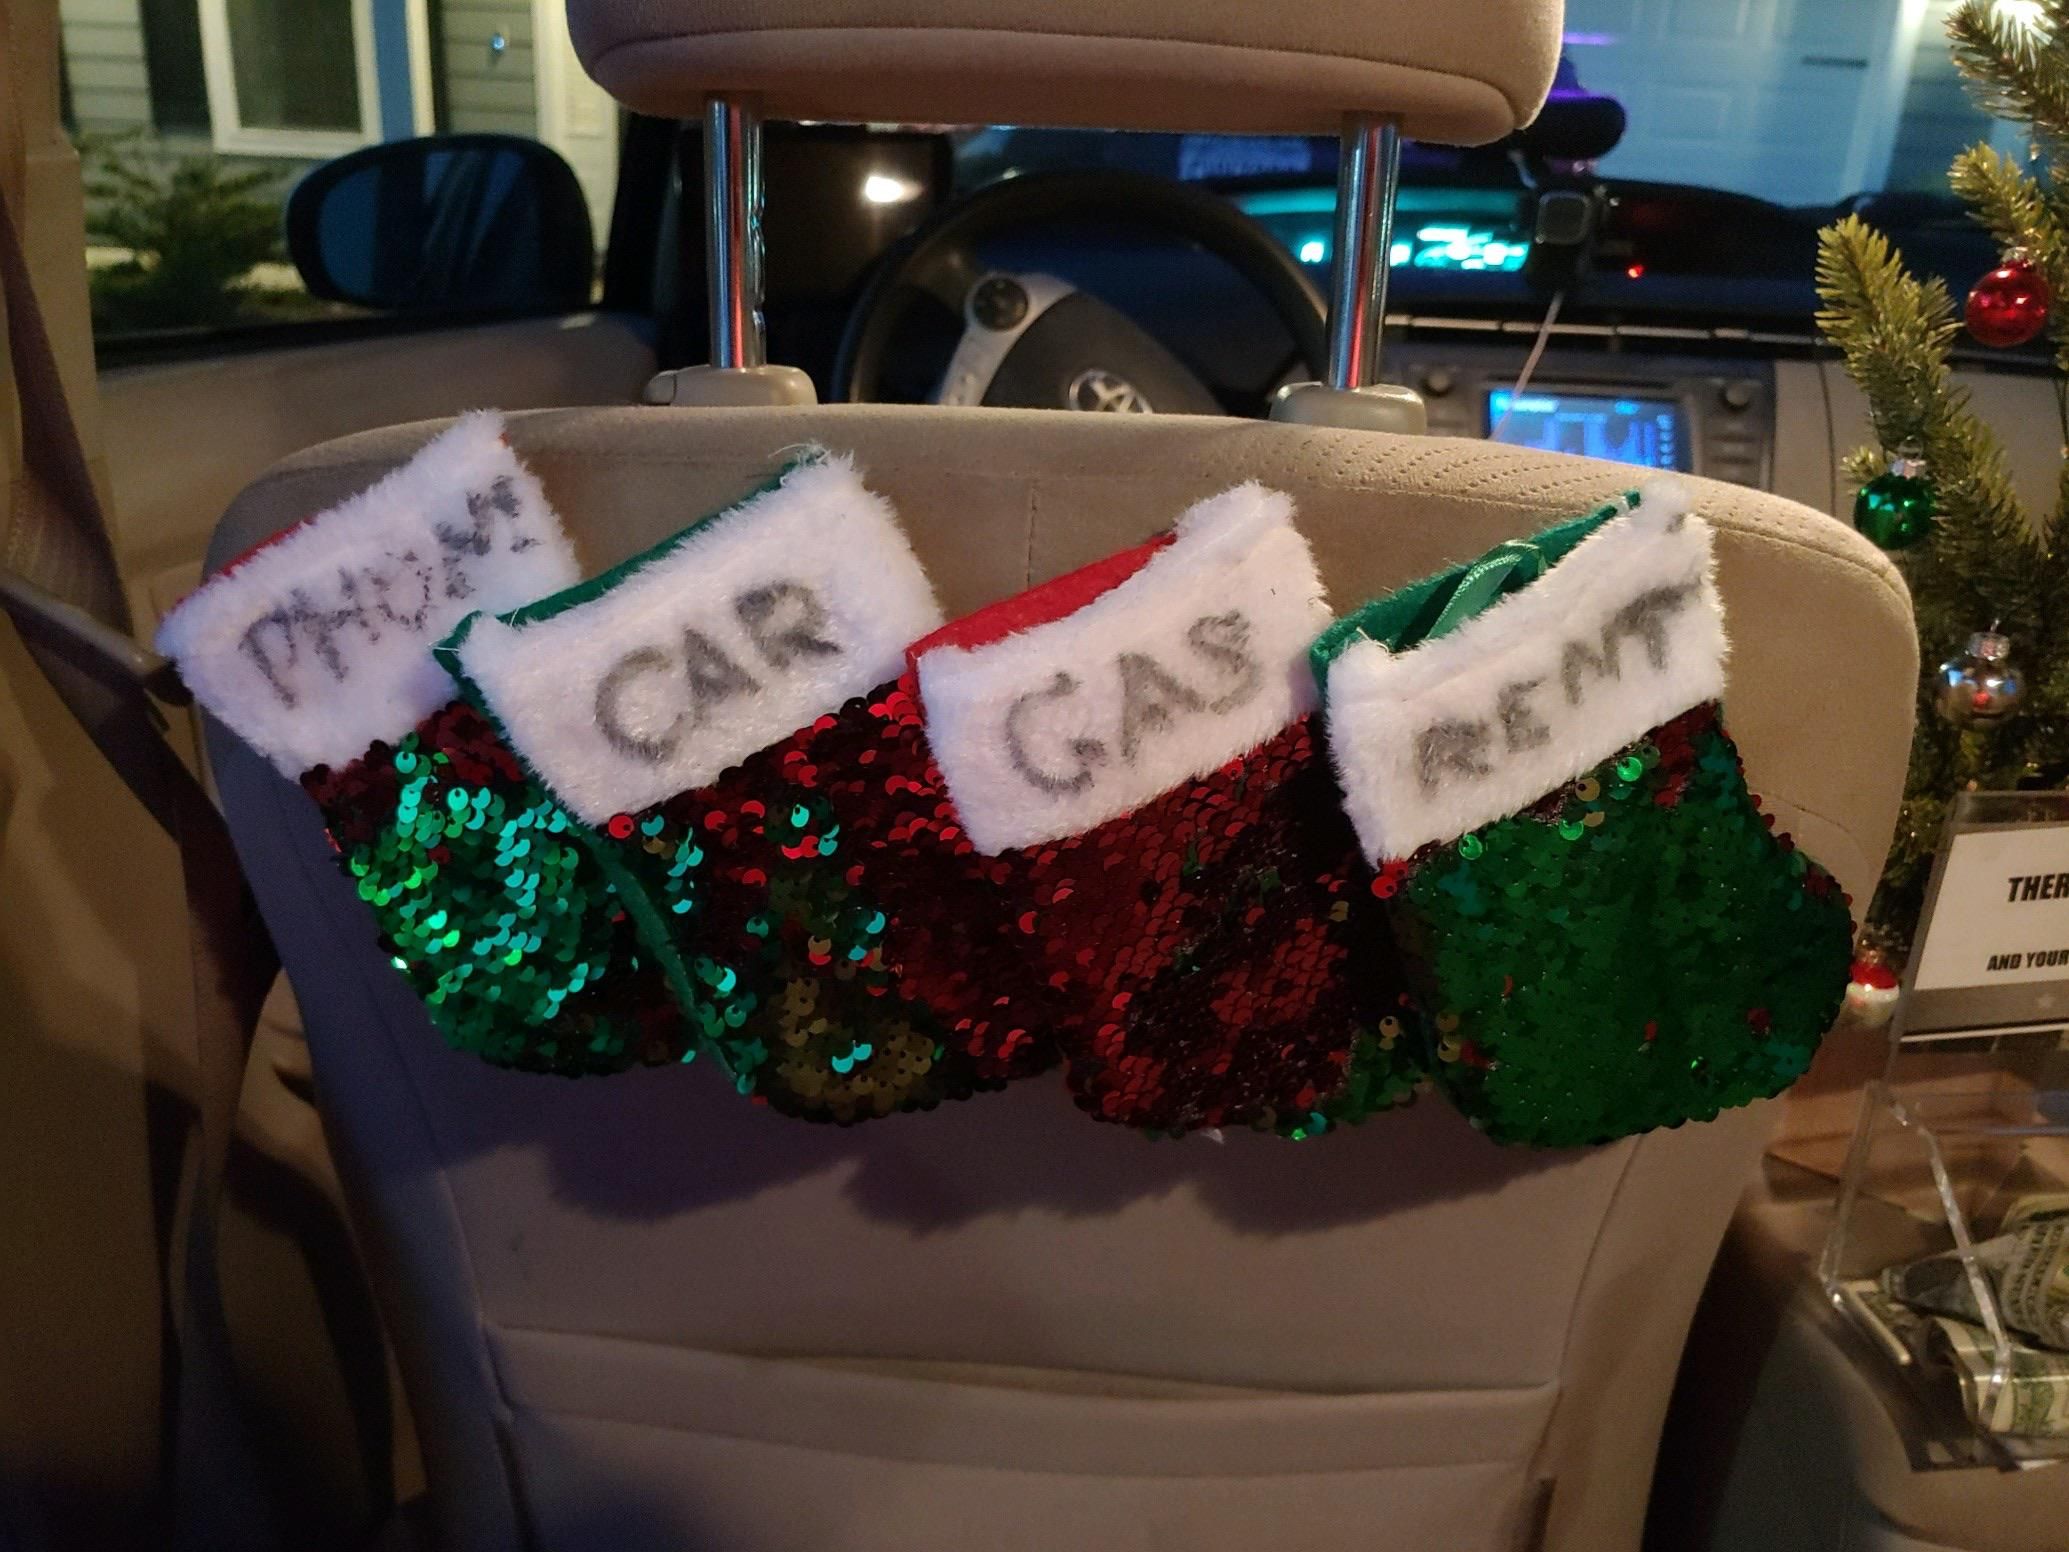 In the back of my Lyft drivers car. Merry Christmas!